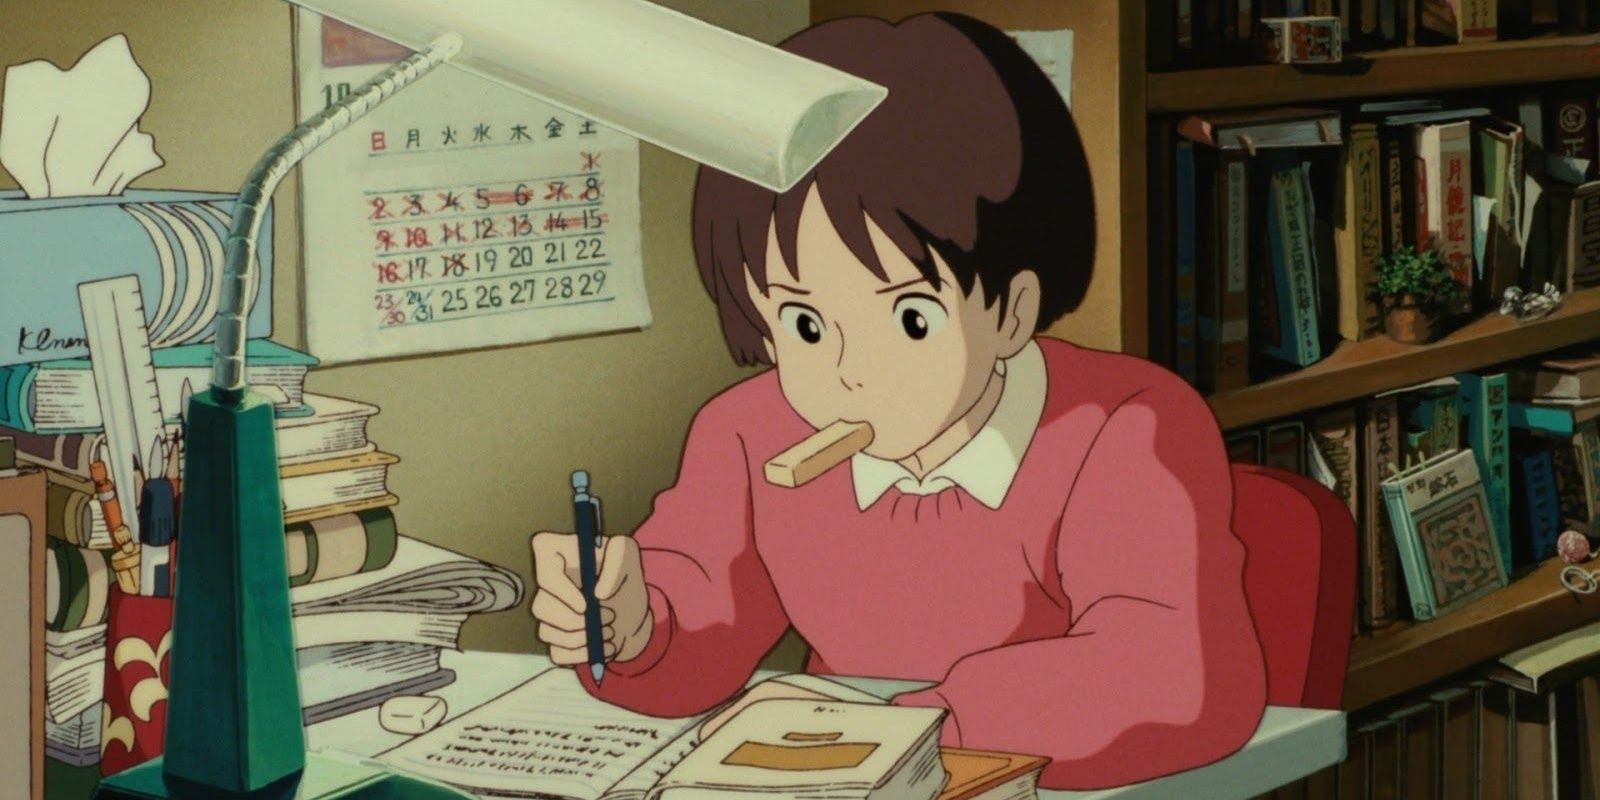 Shizuku sits at her desk, eating and writing something in Whisper of the Heart